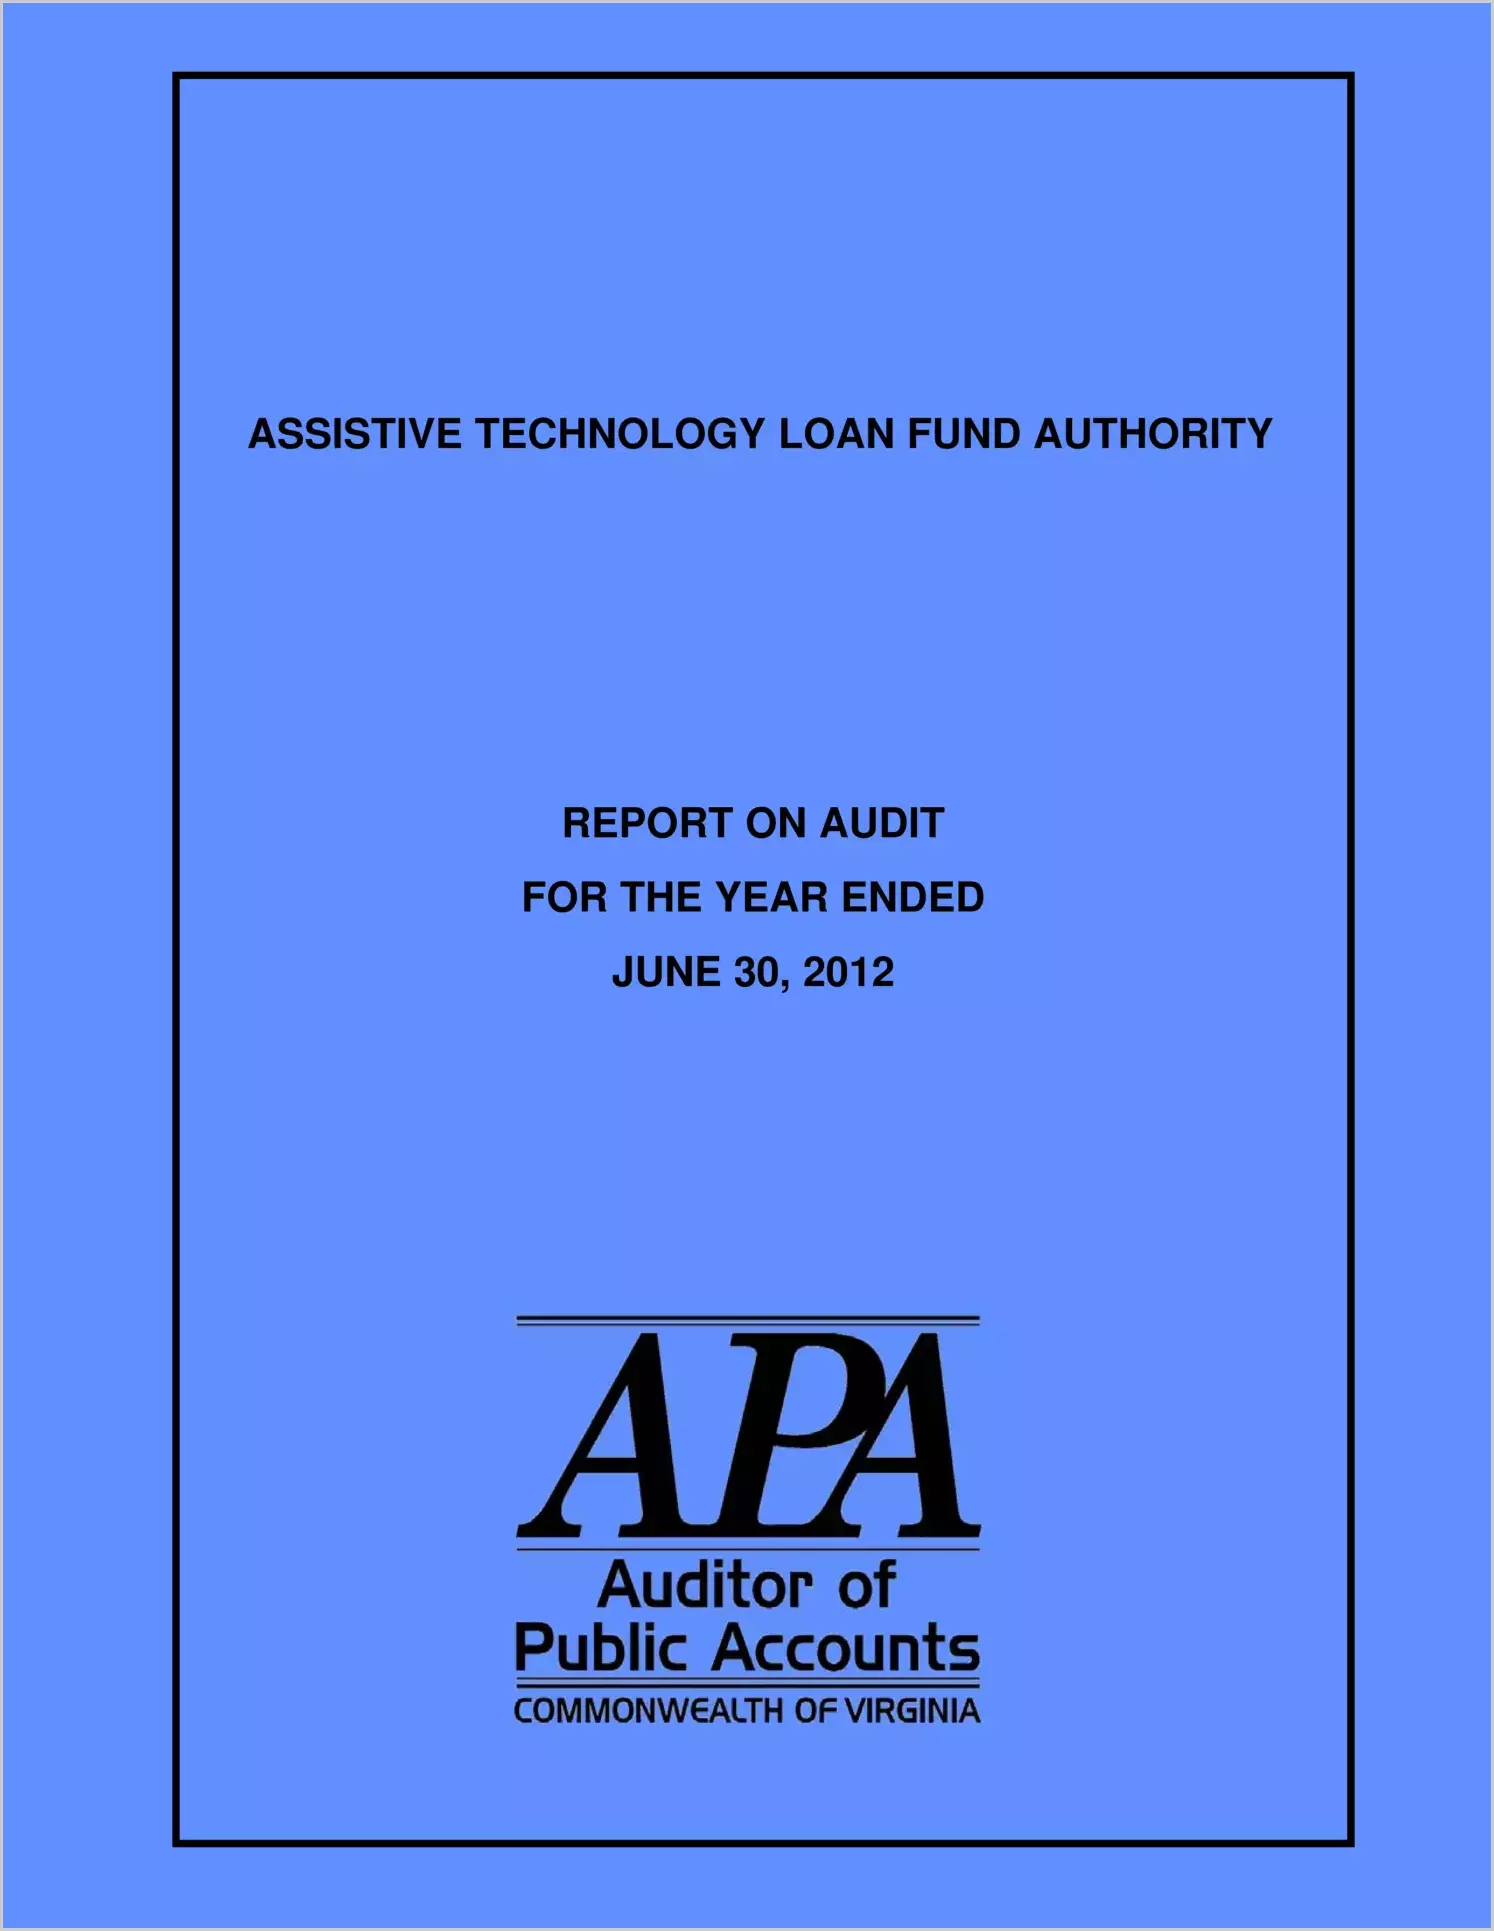 Assistive Technology Loan Fund Authority report on audit for the year ended June 30, 2012